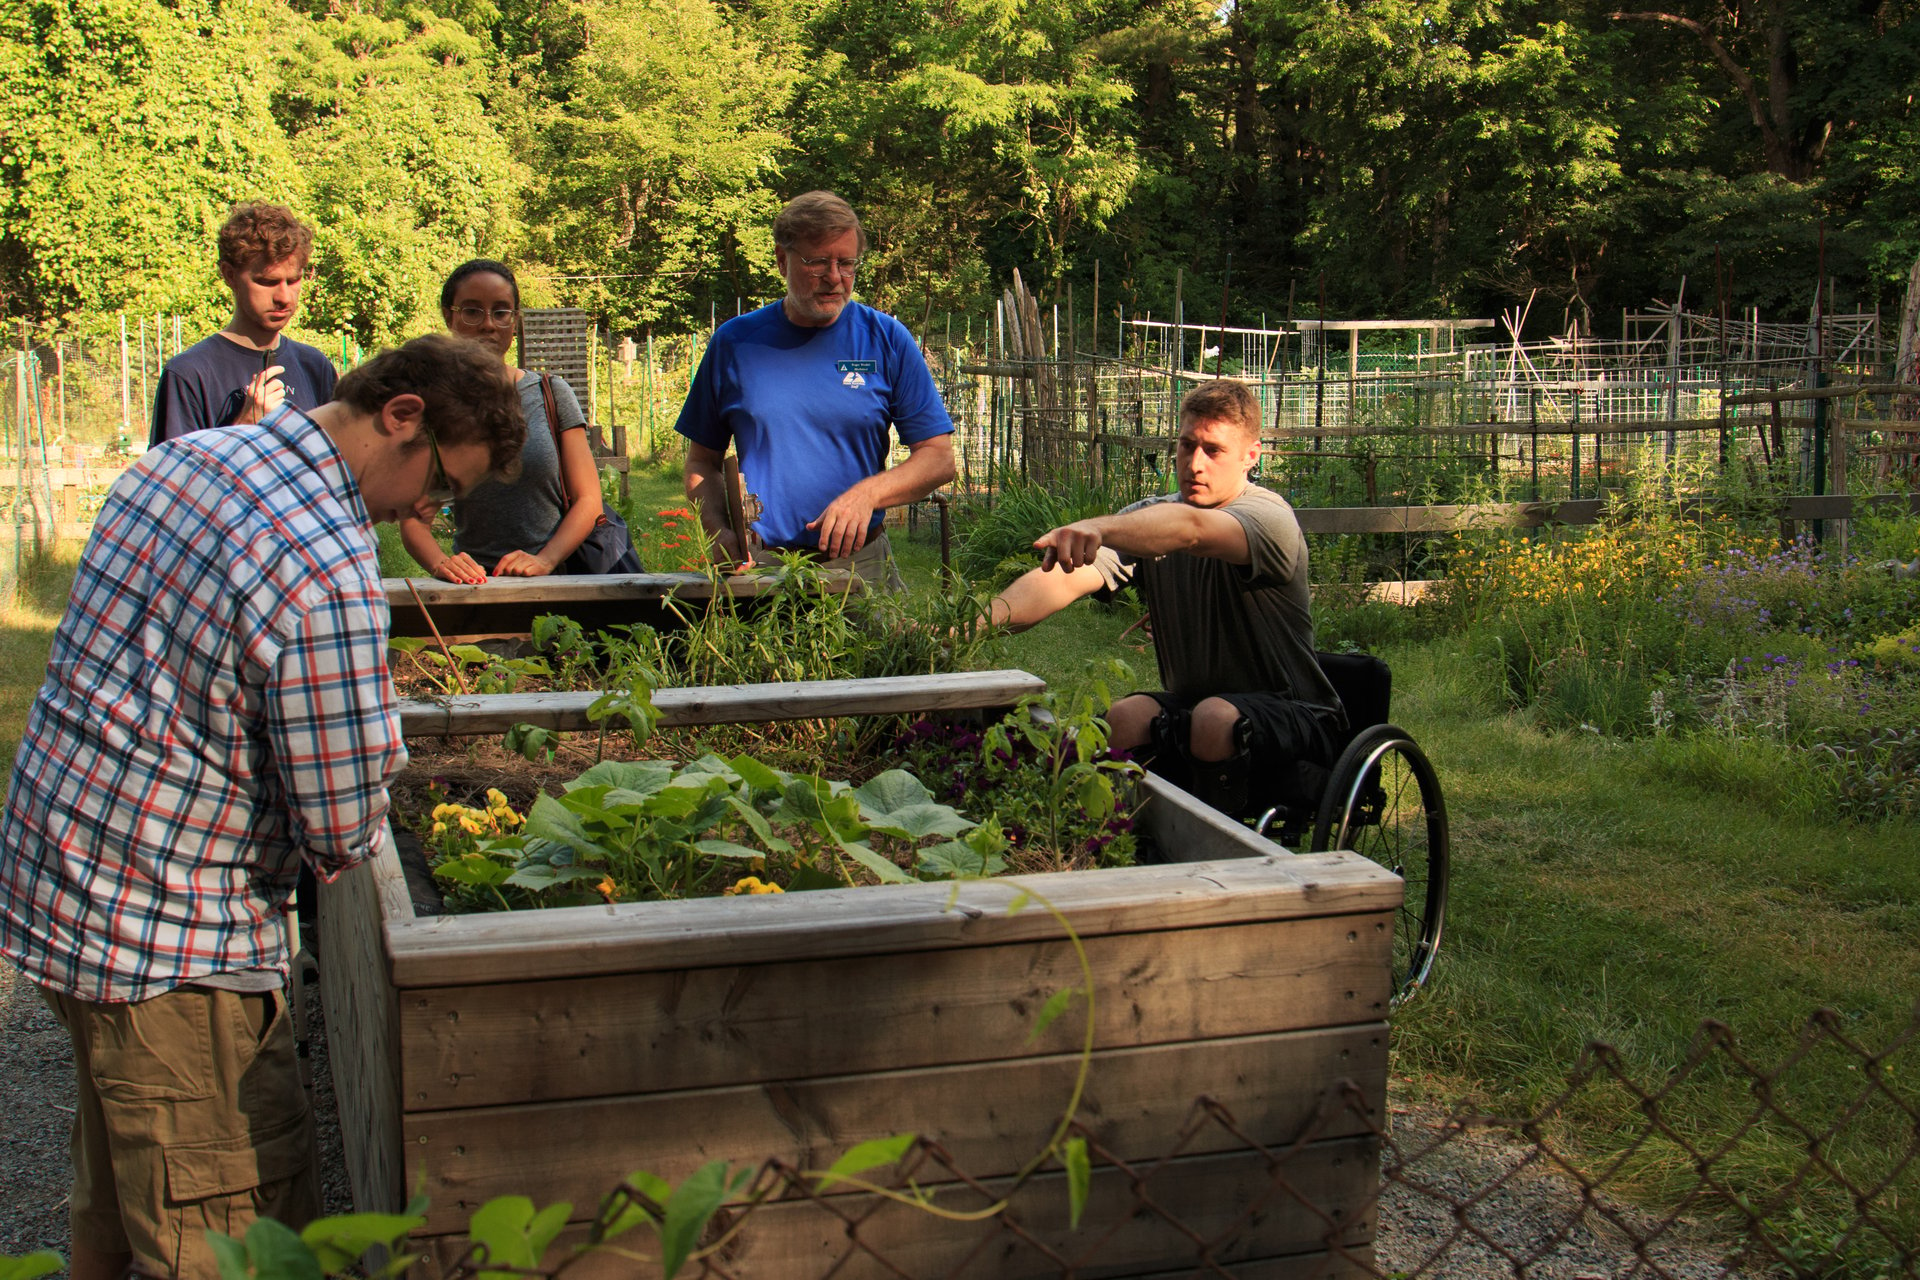 Four standing adults and one adult in a wheel chair working on a raised garden bed.